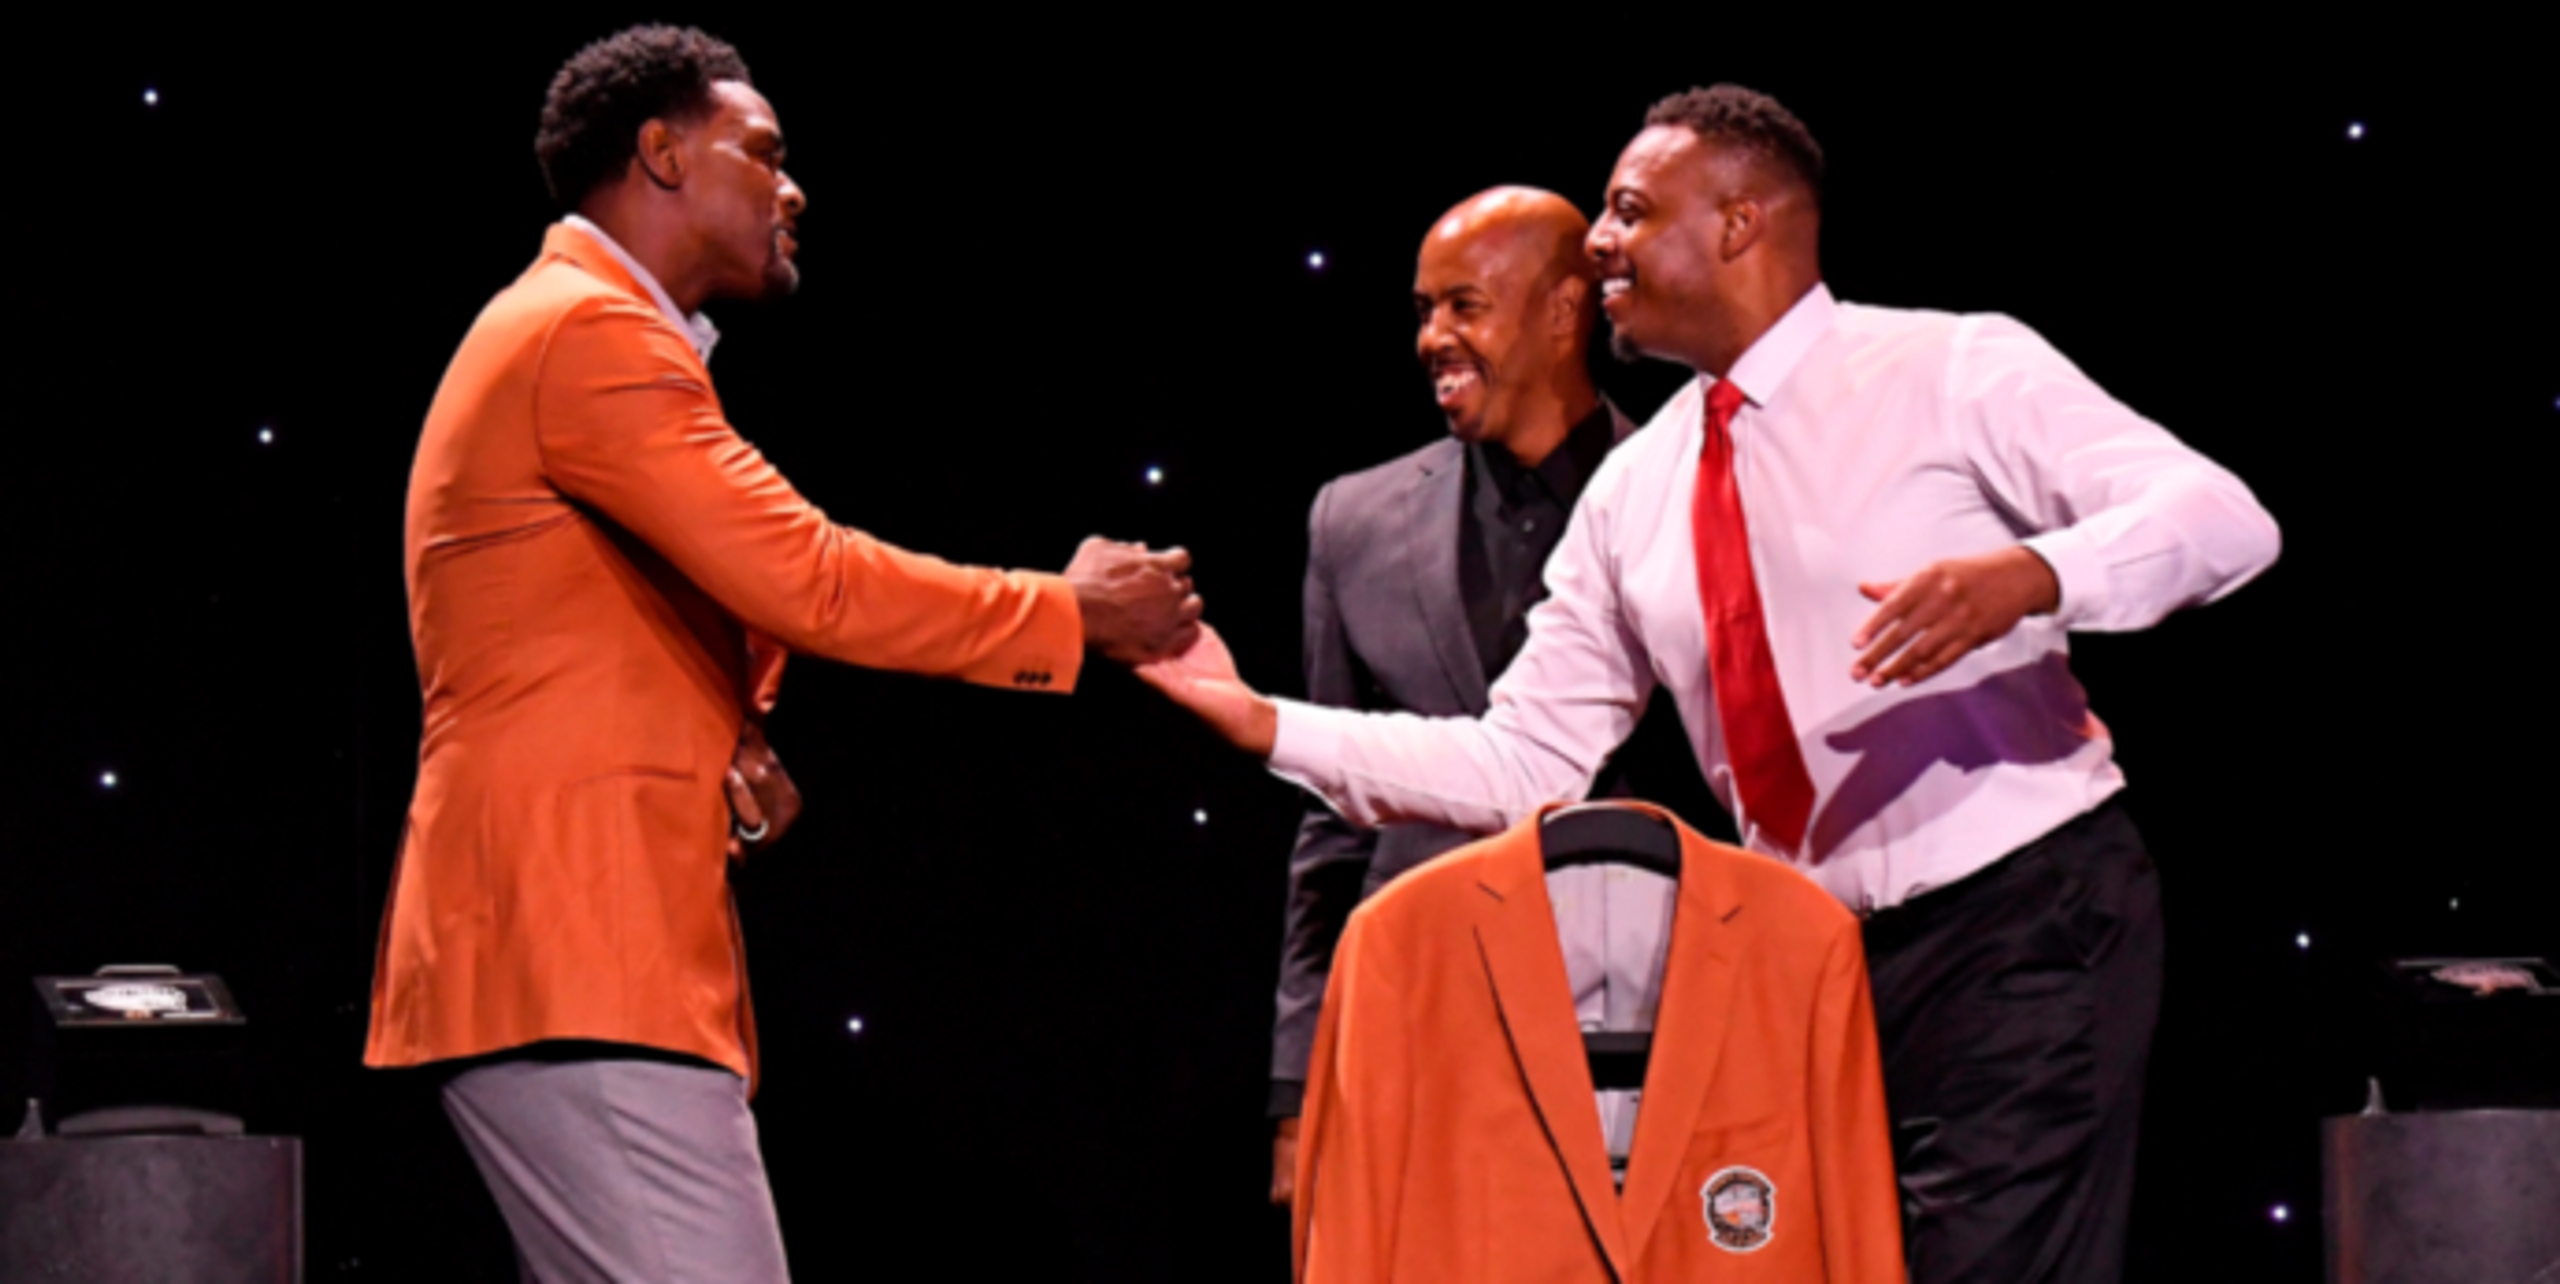 Basketball Hall of Fame honors Class of 2021 inductees: Full speeches